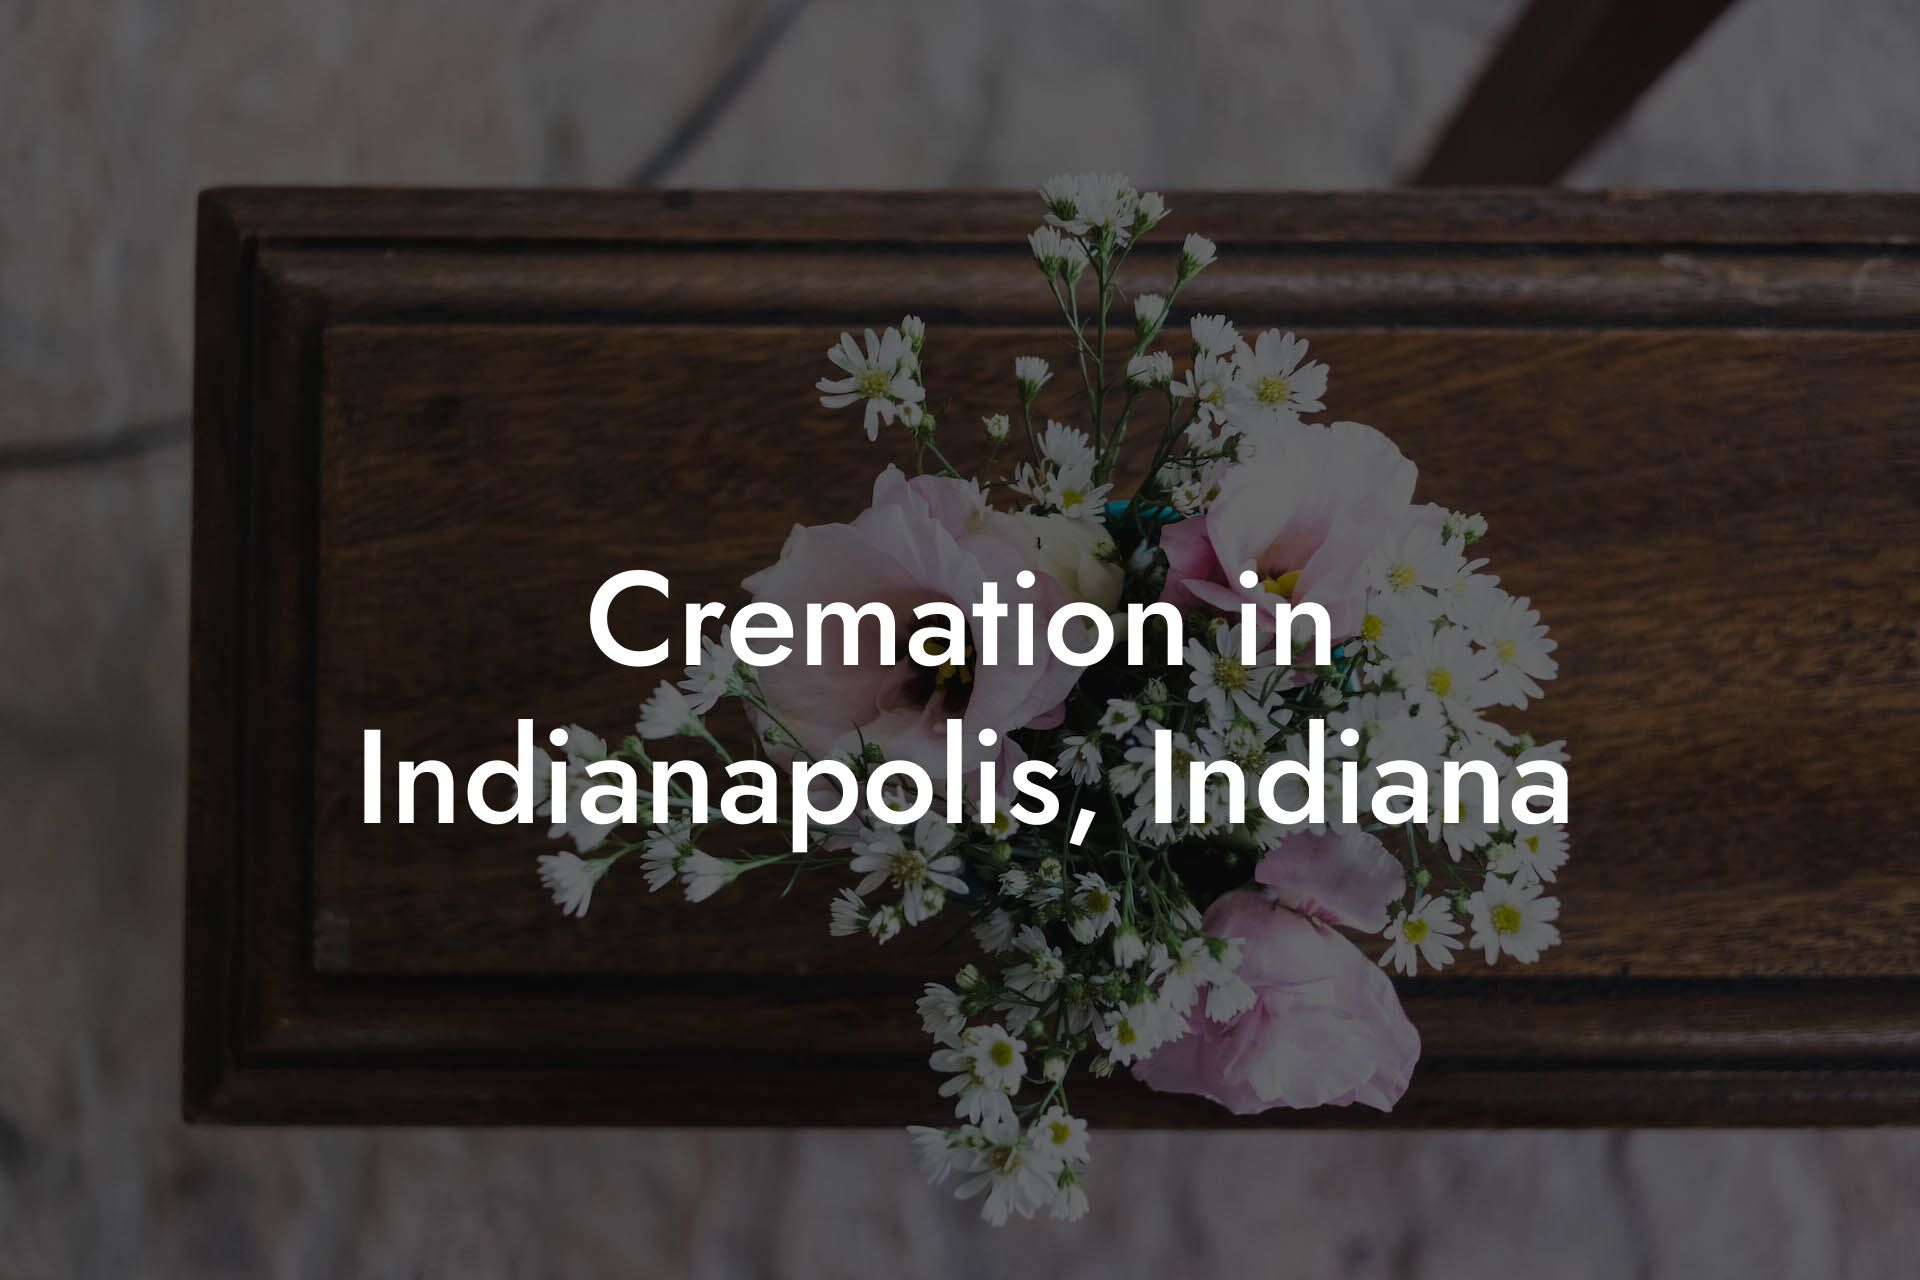 Cremation in Indianapolis, Indiana